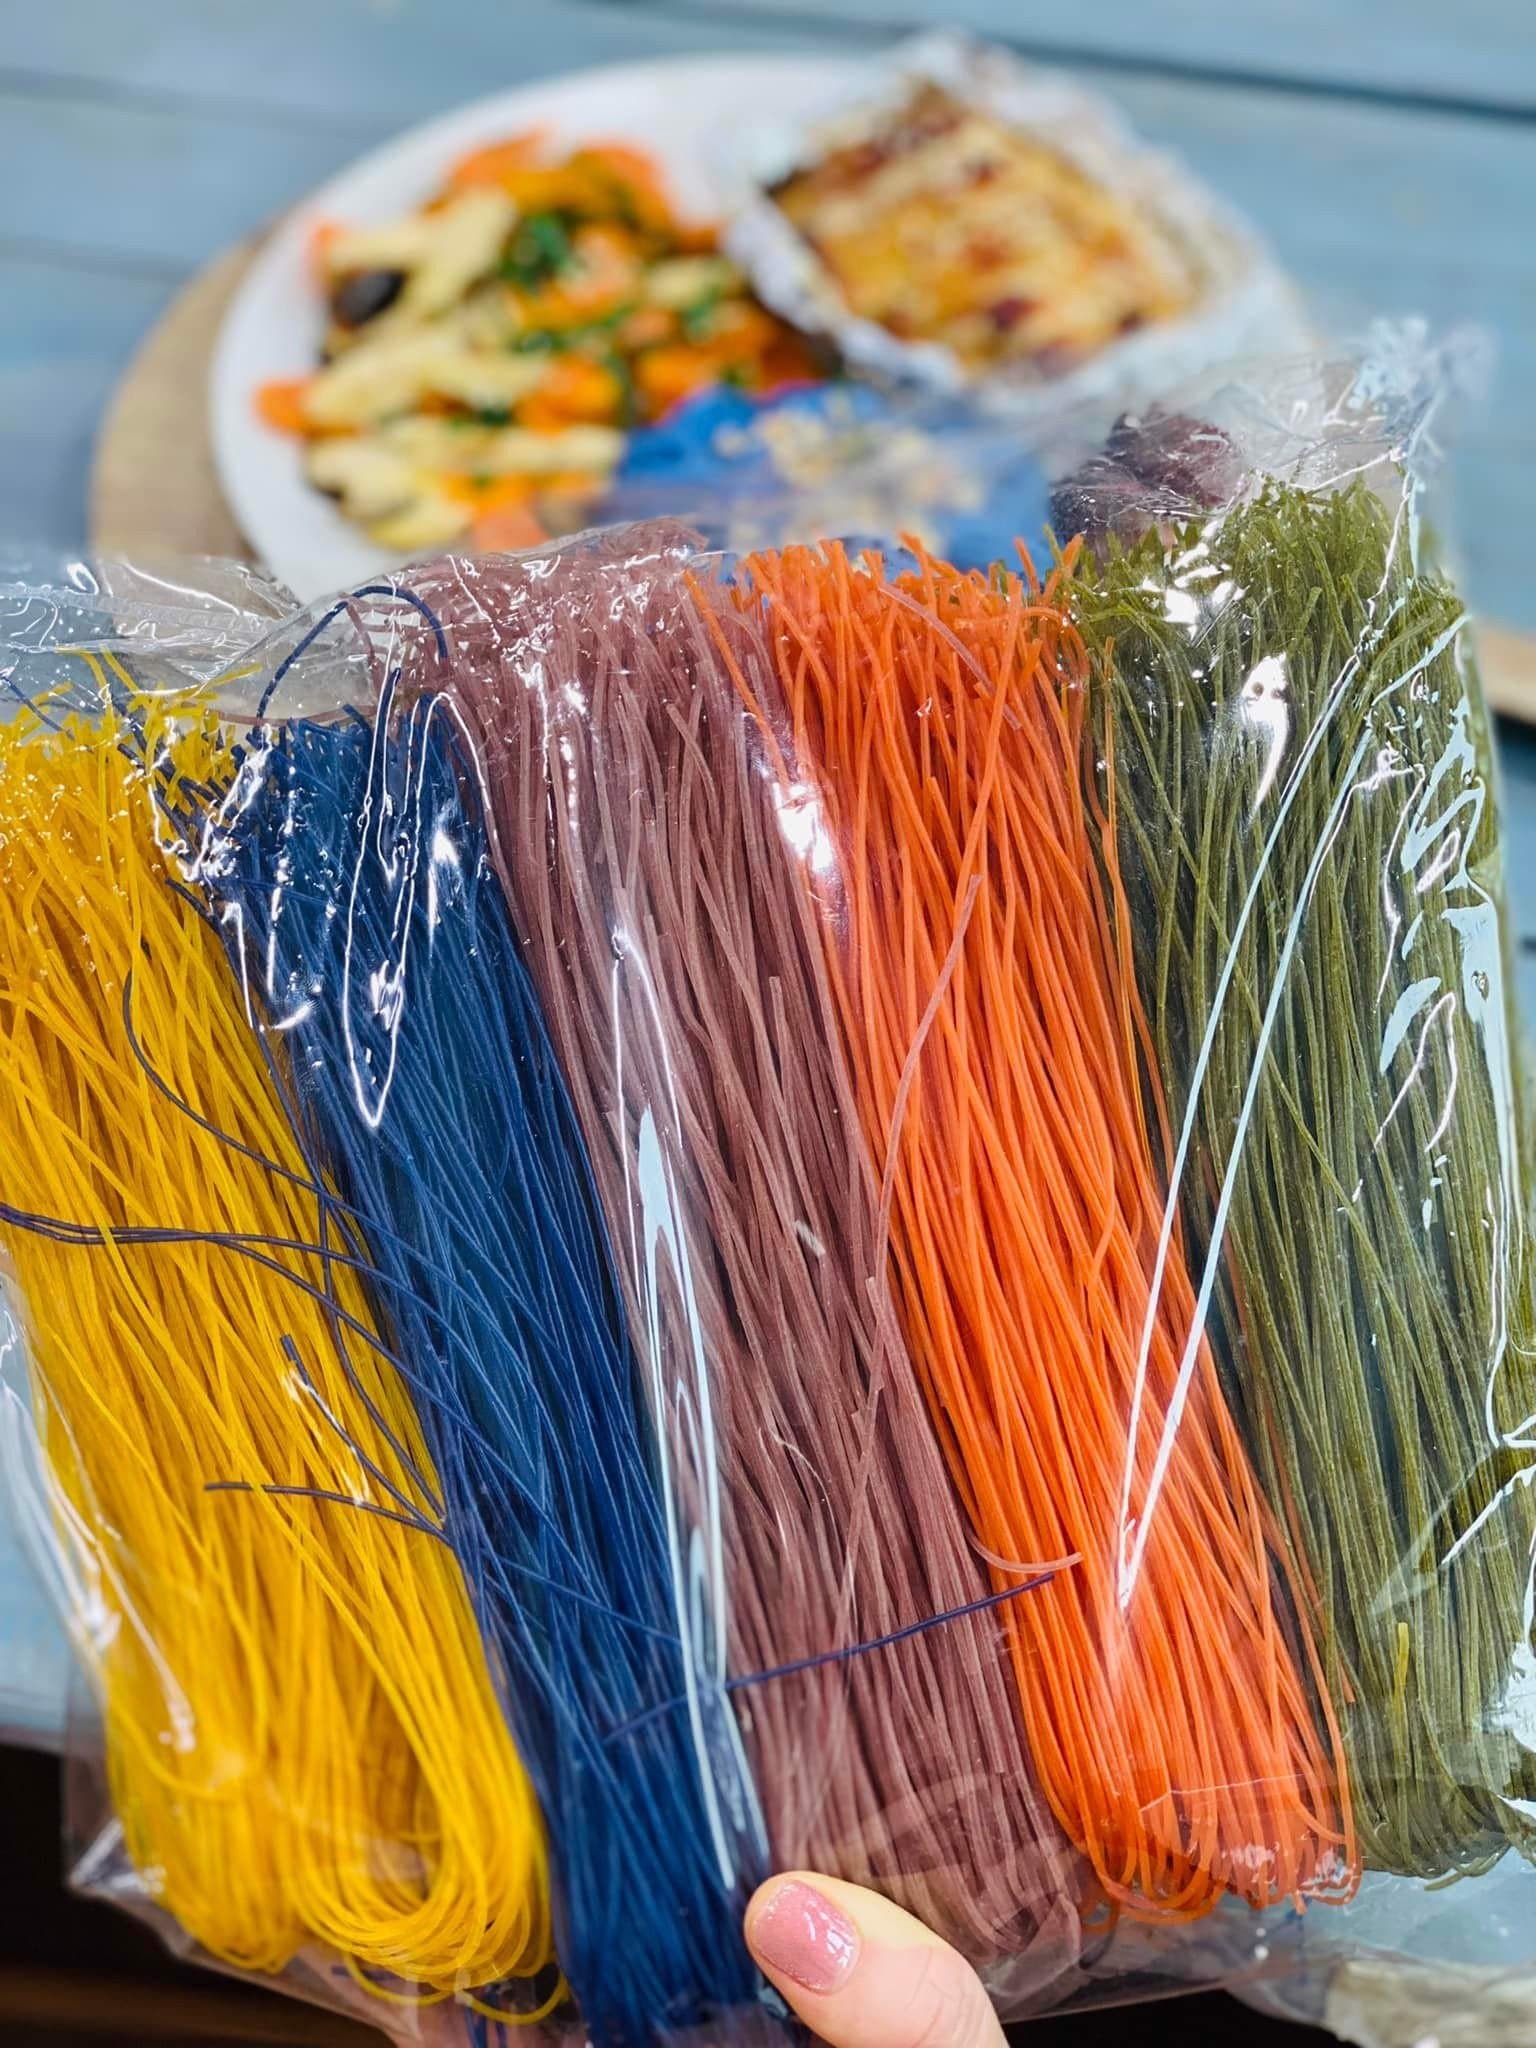 GLUTEN FREE RICE VERMICELLI COLORFUL FROM VIETNAM WITH FACTORY PRICE_VIETNAM COLORFUL RICE NOODLE